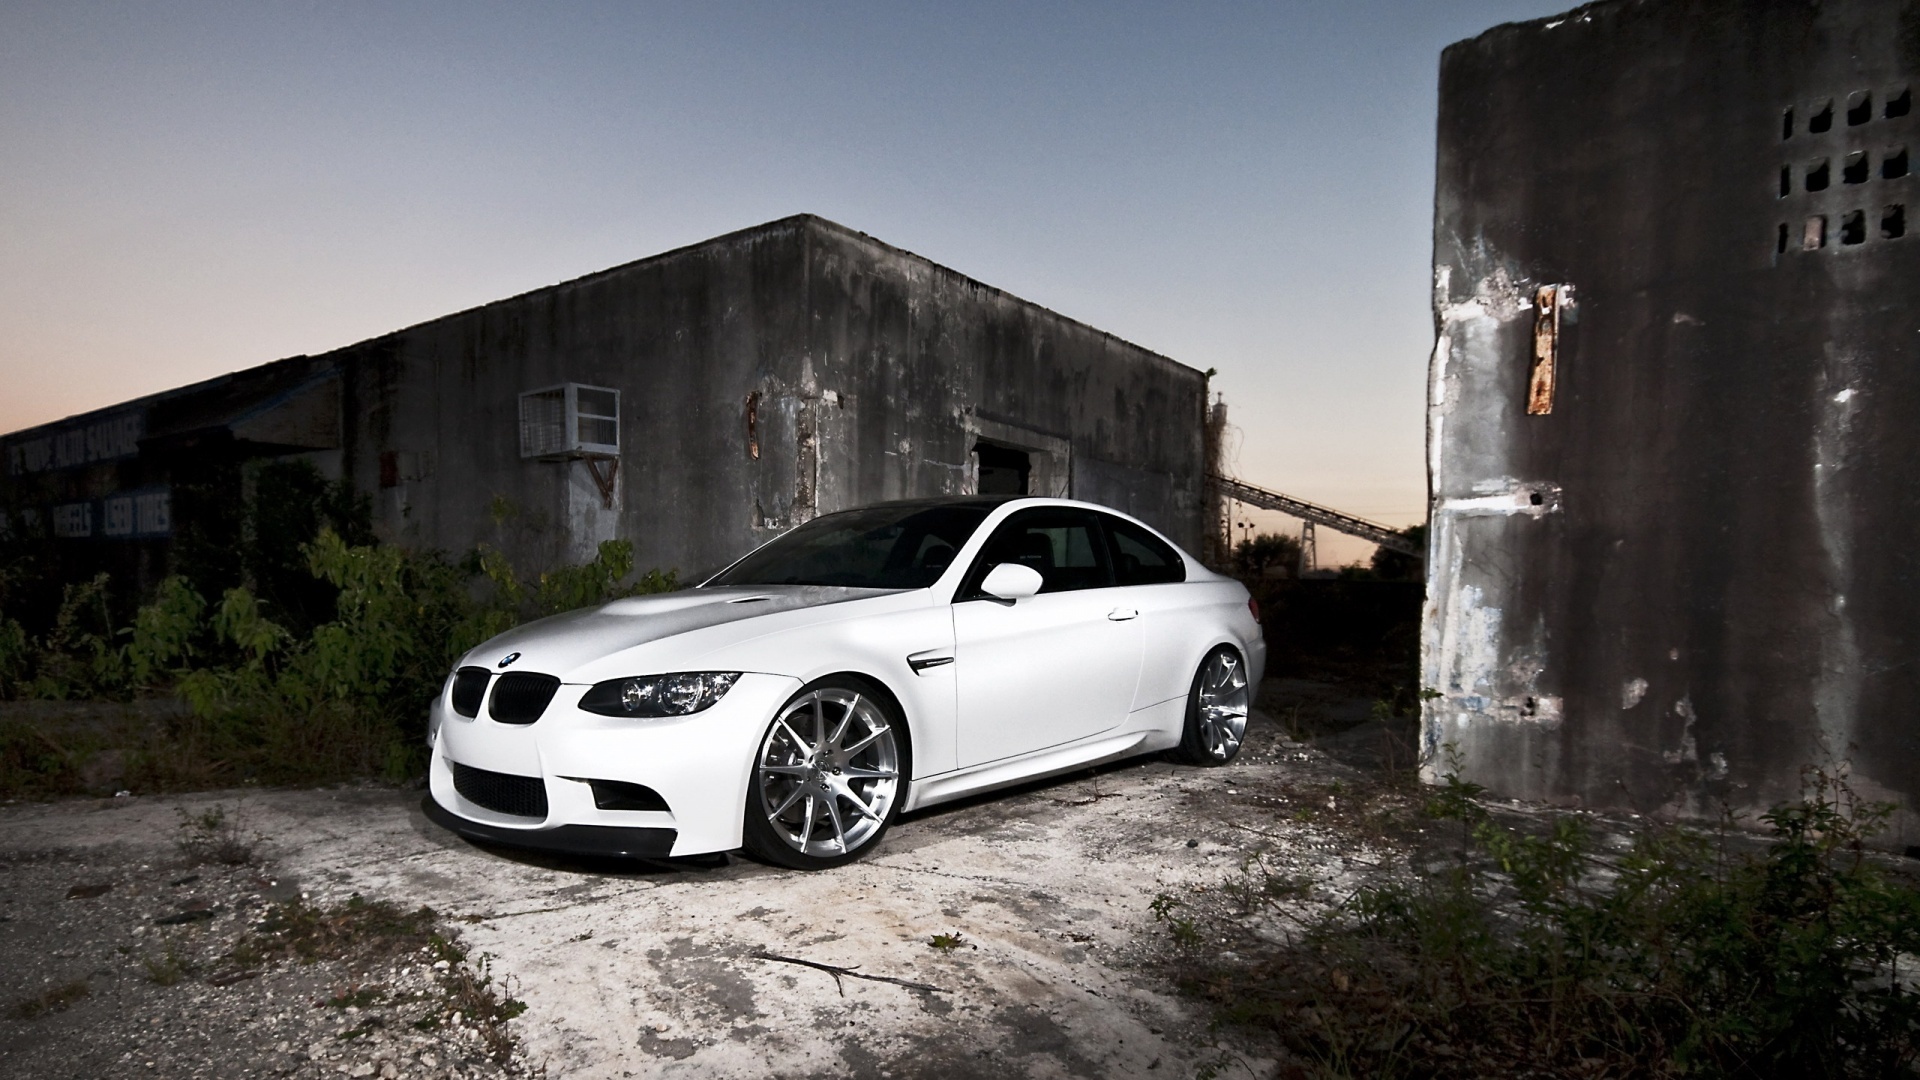 bmw m3 | In HD Wallpaper Home Design and Cars HD Wallpaper - Part 3